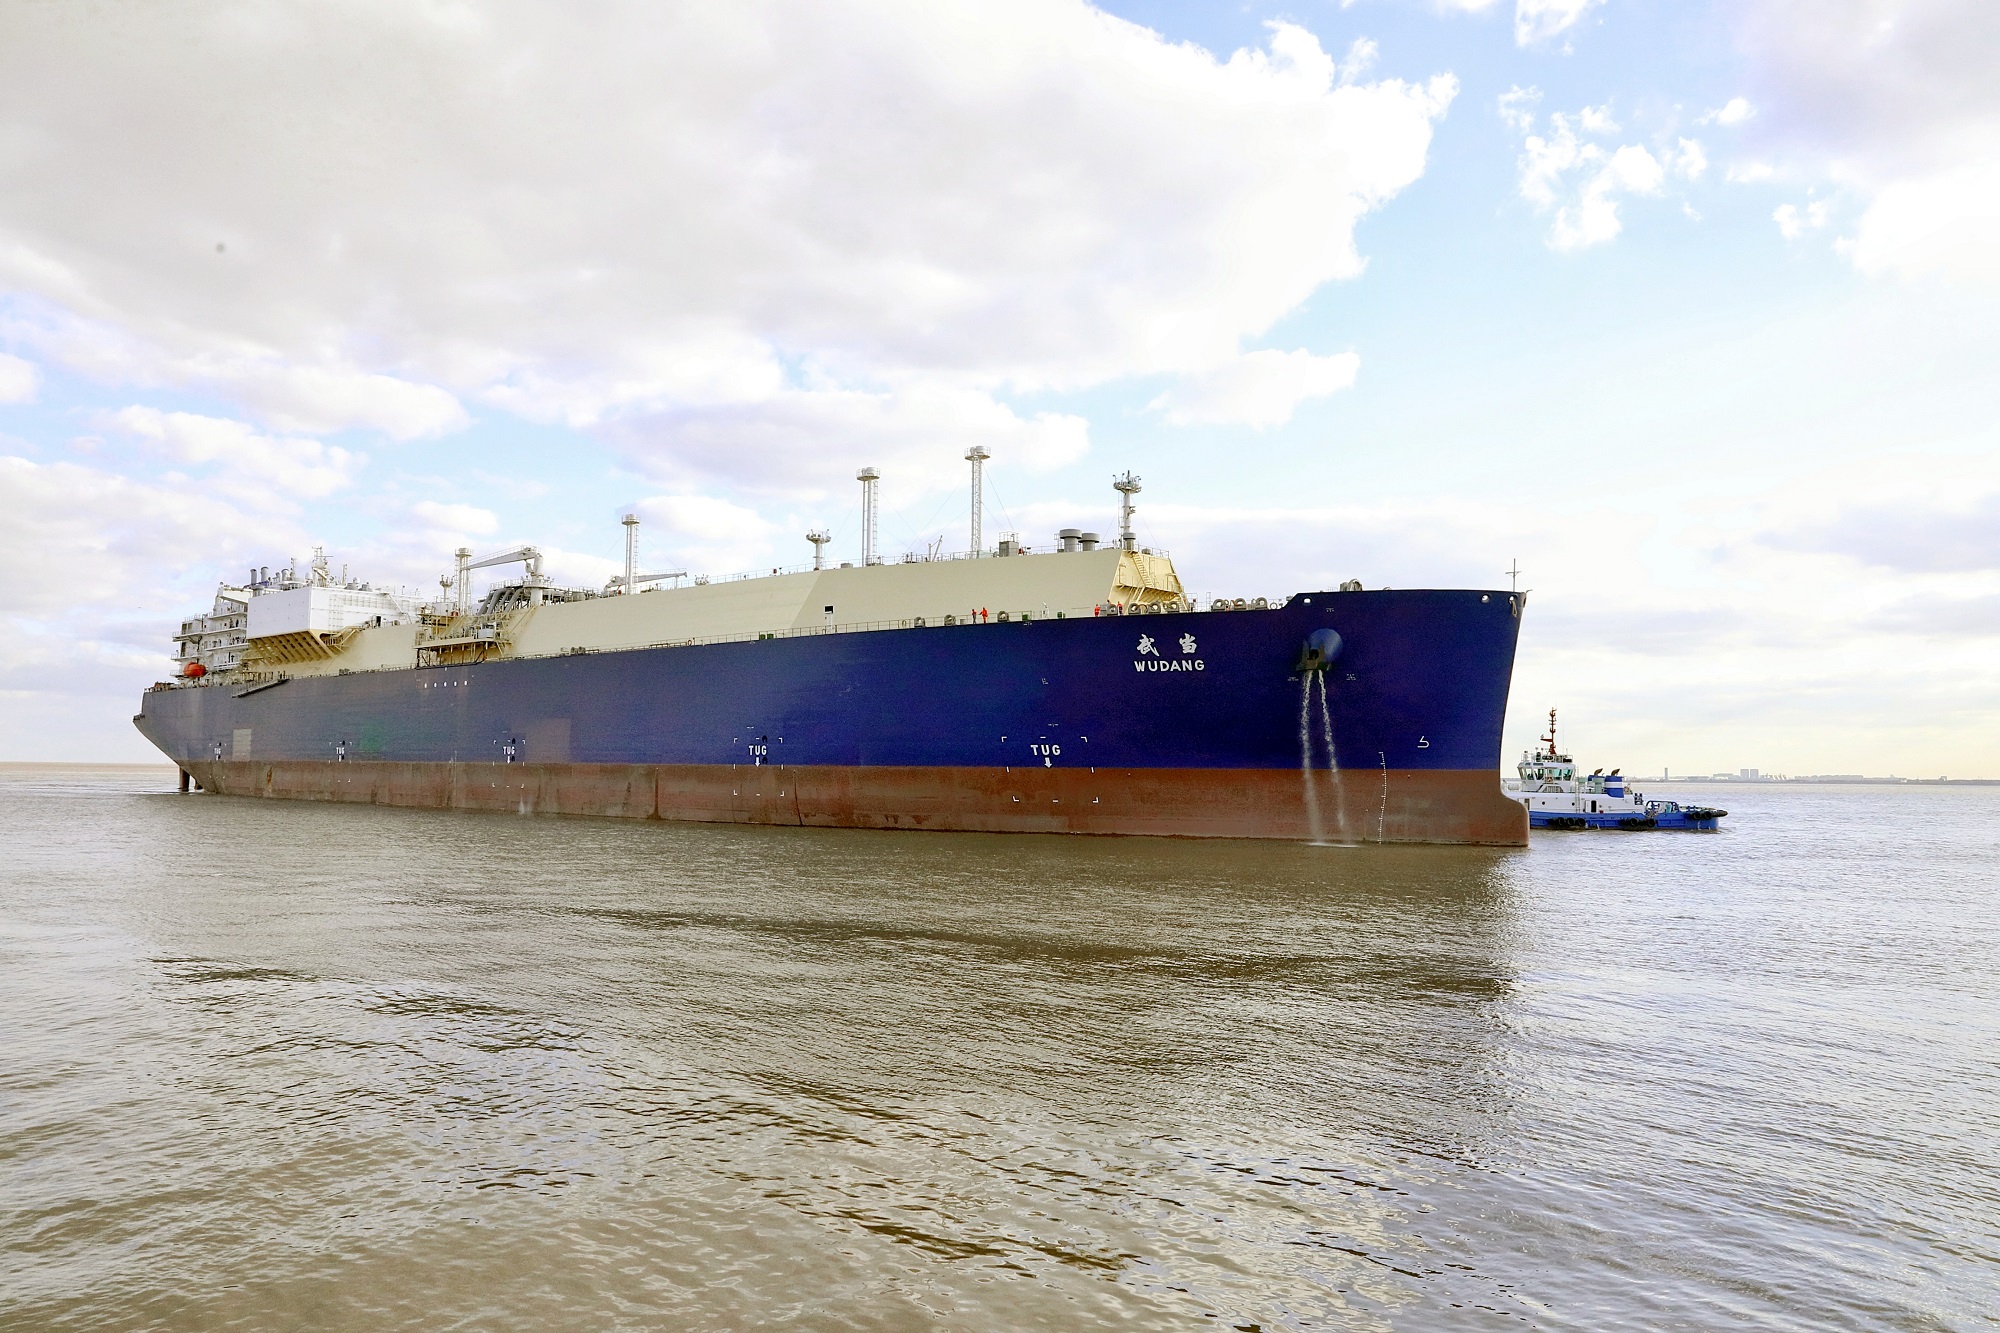 Hudong-Zhonghua wraps up work on second LNG carrier for Cosco and PetroChina